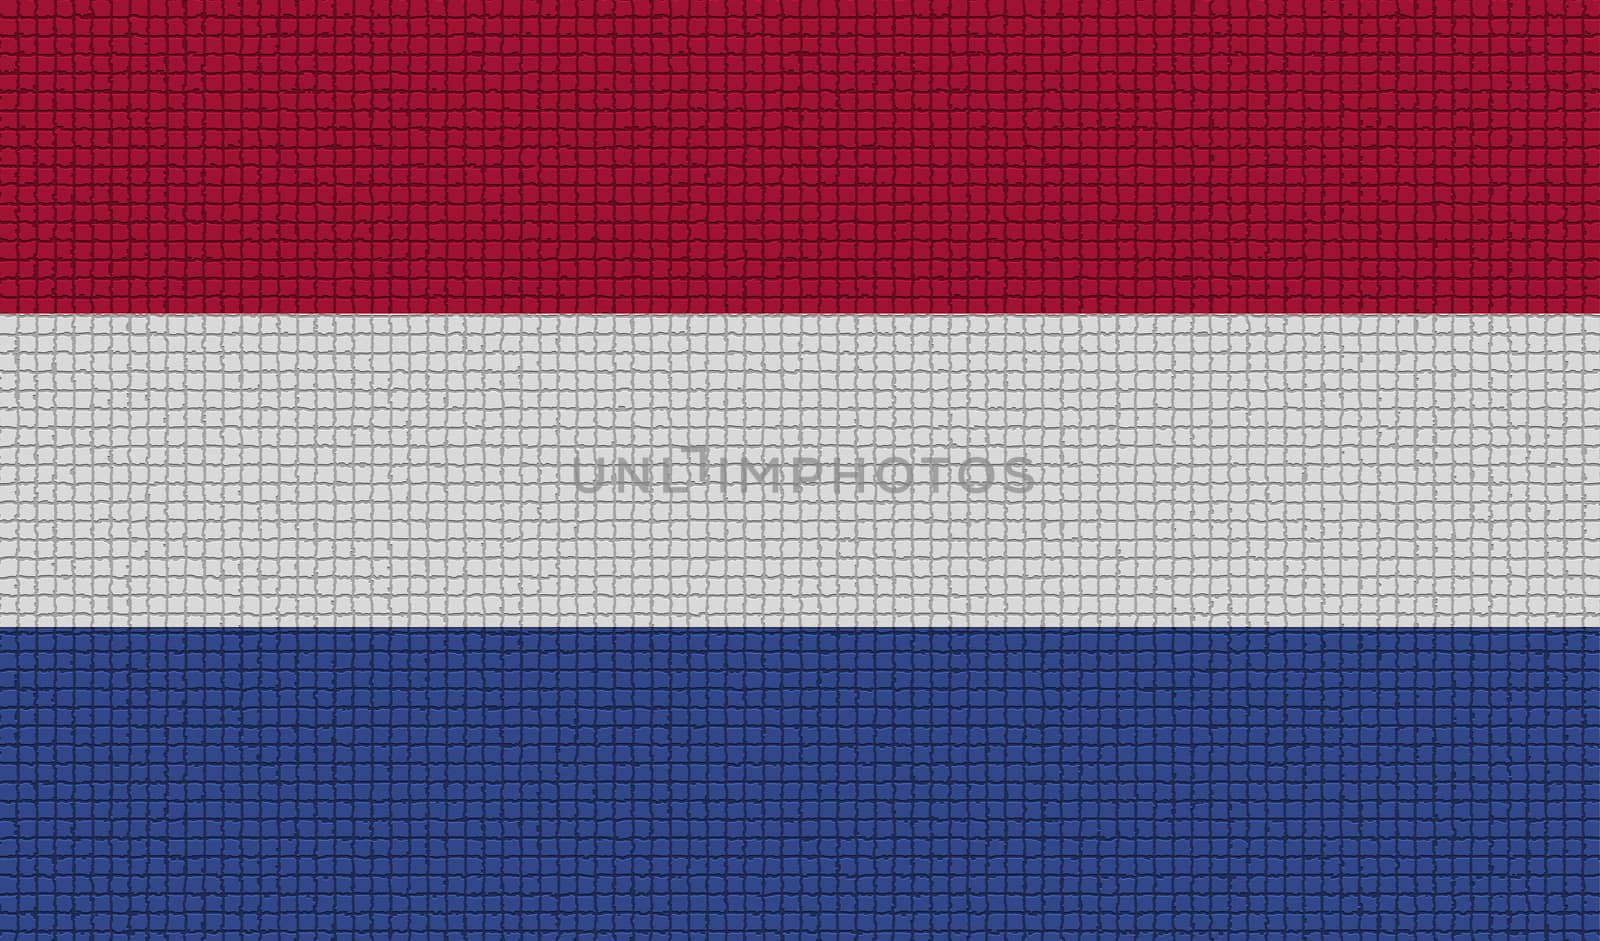 Flags of Netherlands with abstract textures. Rasterized version